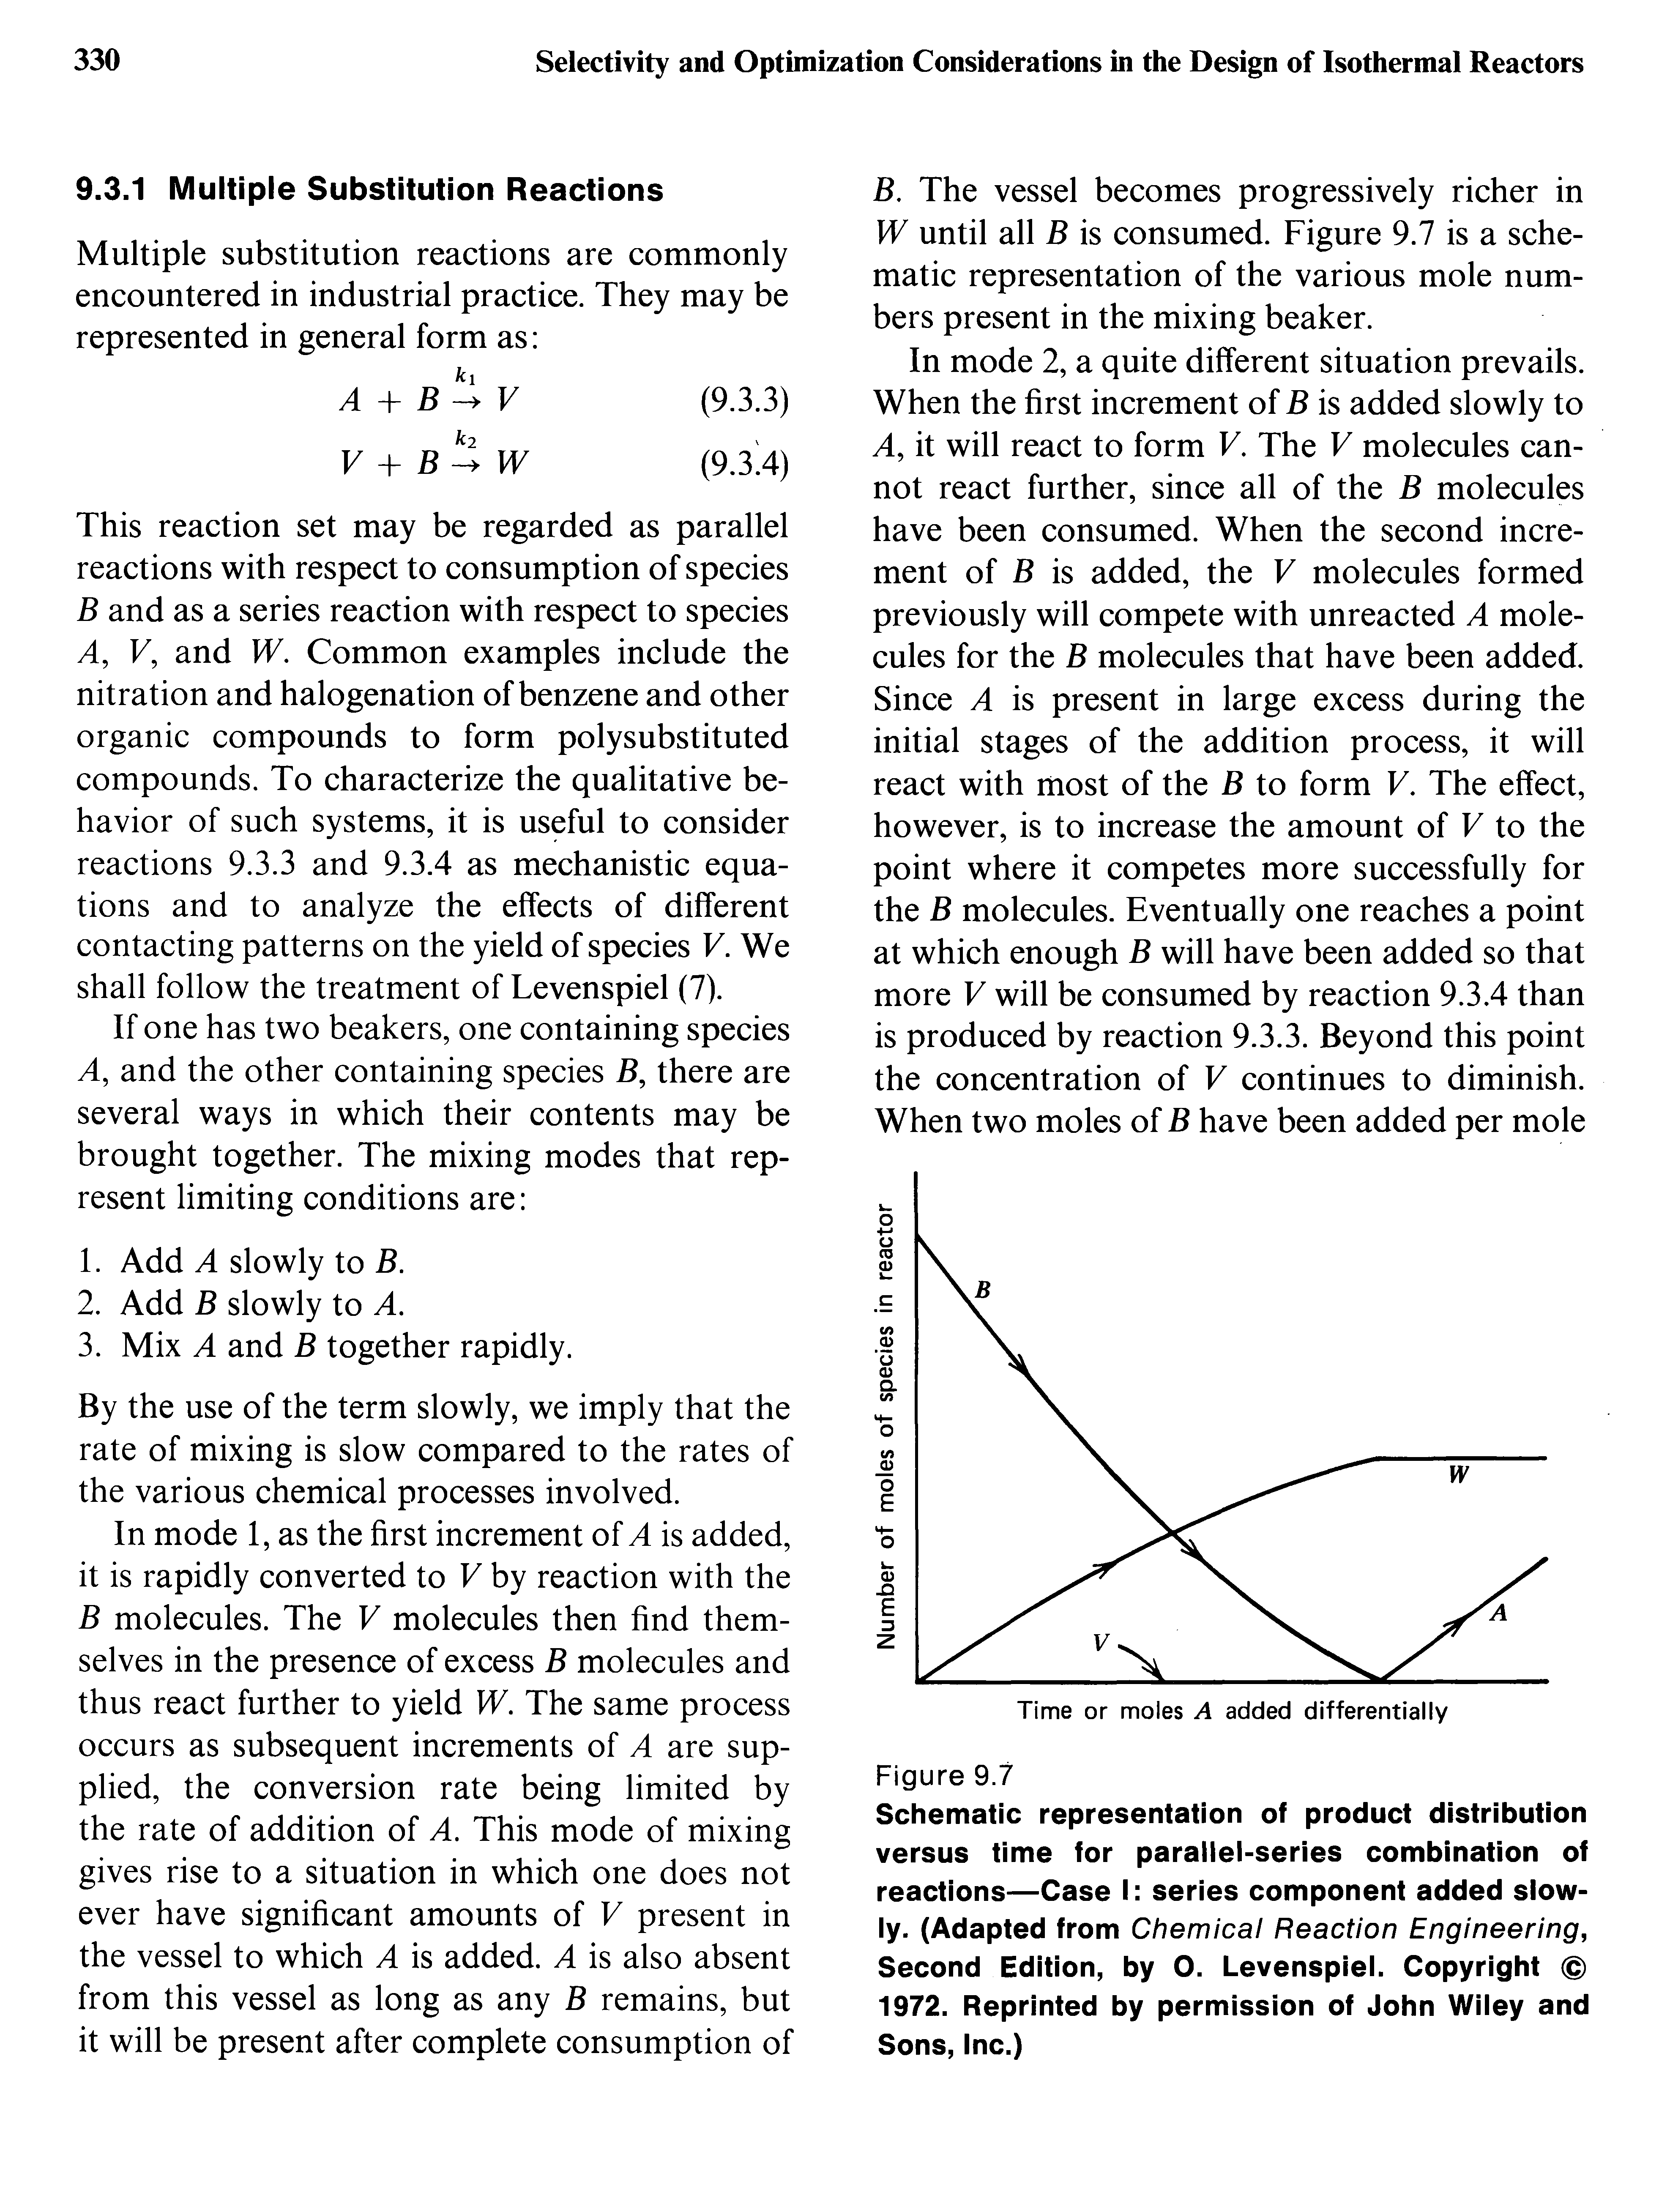 Schematic representation of product distribution versus time for parallel-series combination of reactions—Case I series component added slowly. (Adapted from Chemical Reaction Engineering, Second Edition, by O. Levenspiel. Copyright 1972. Reprinted by permission of John Wiley and Sons, Inc.)...